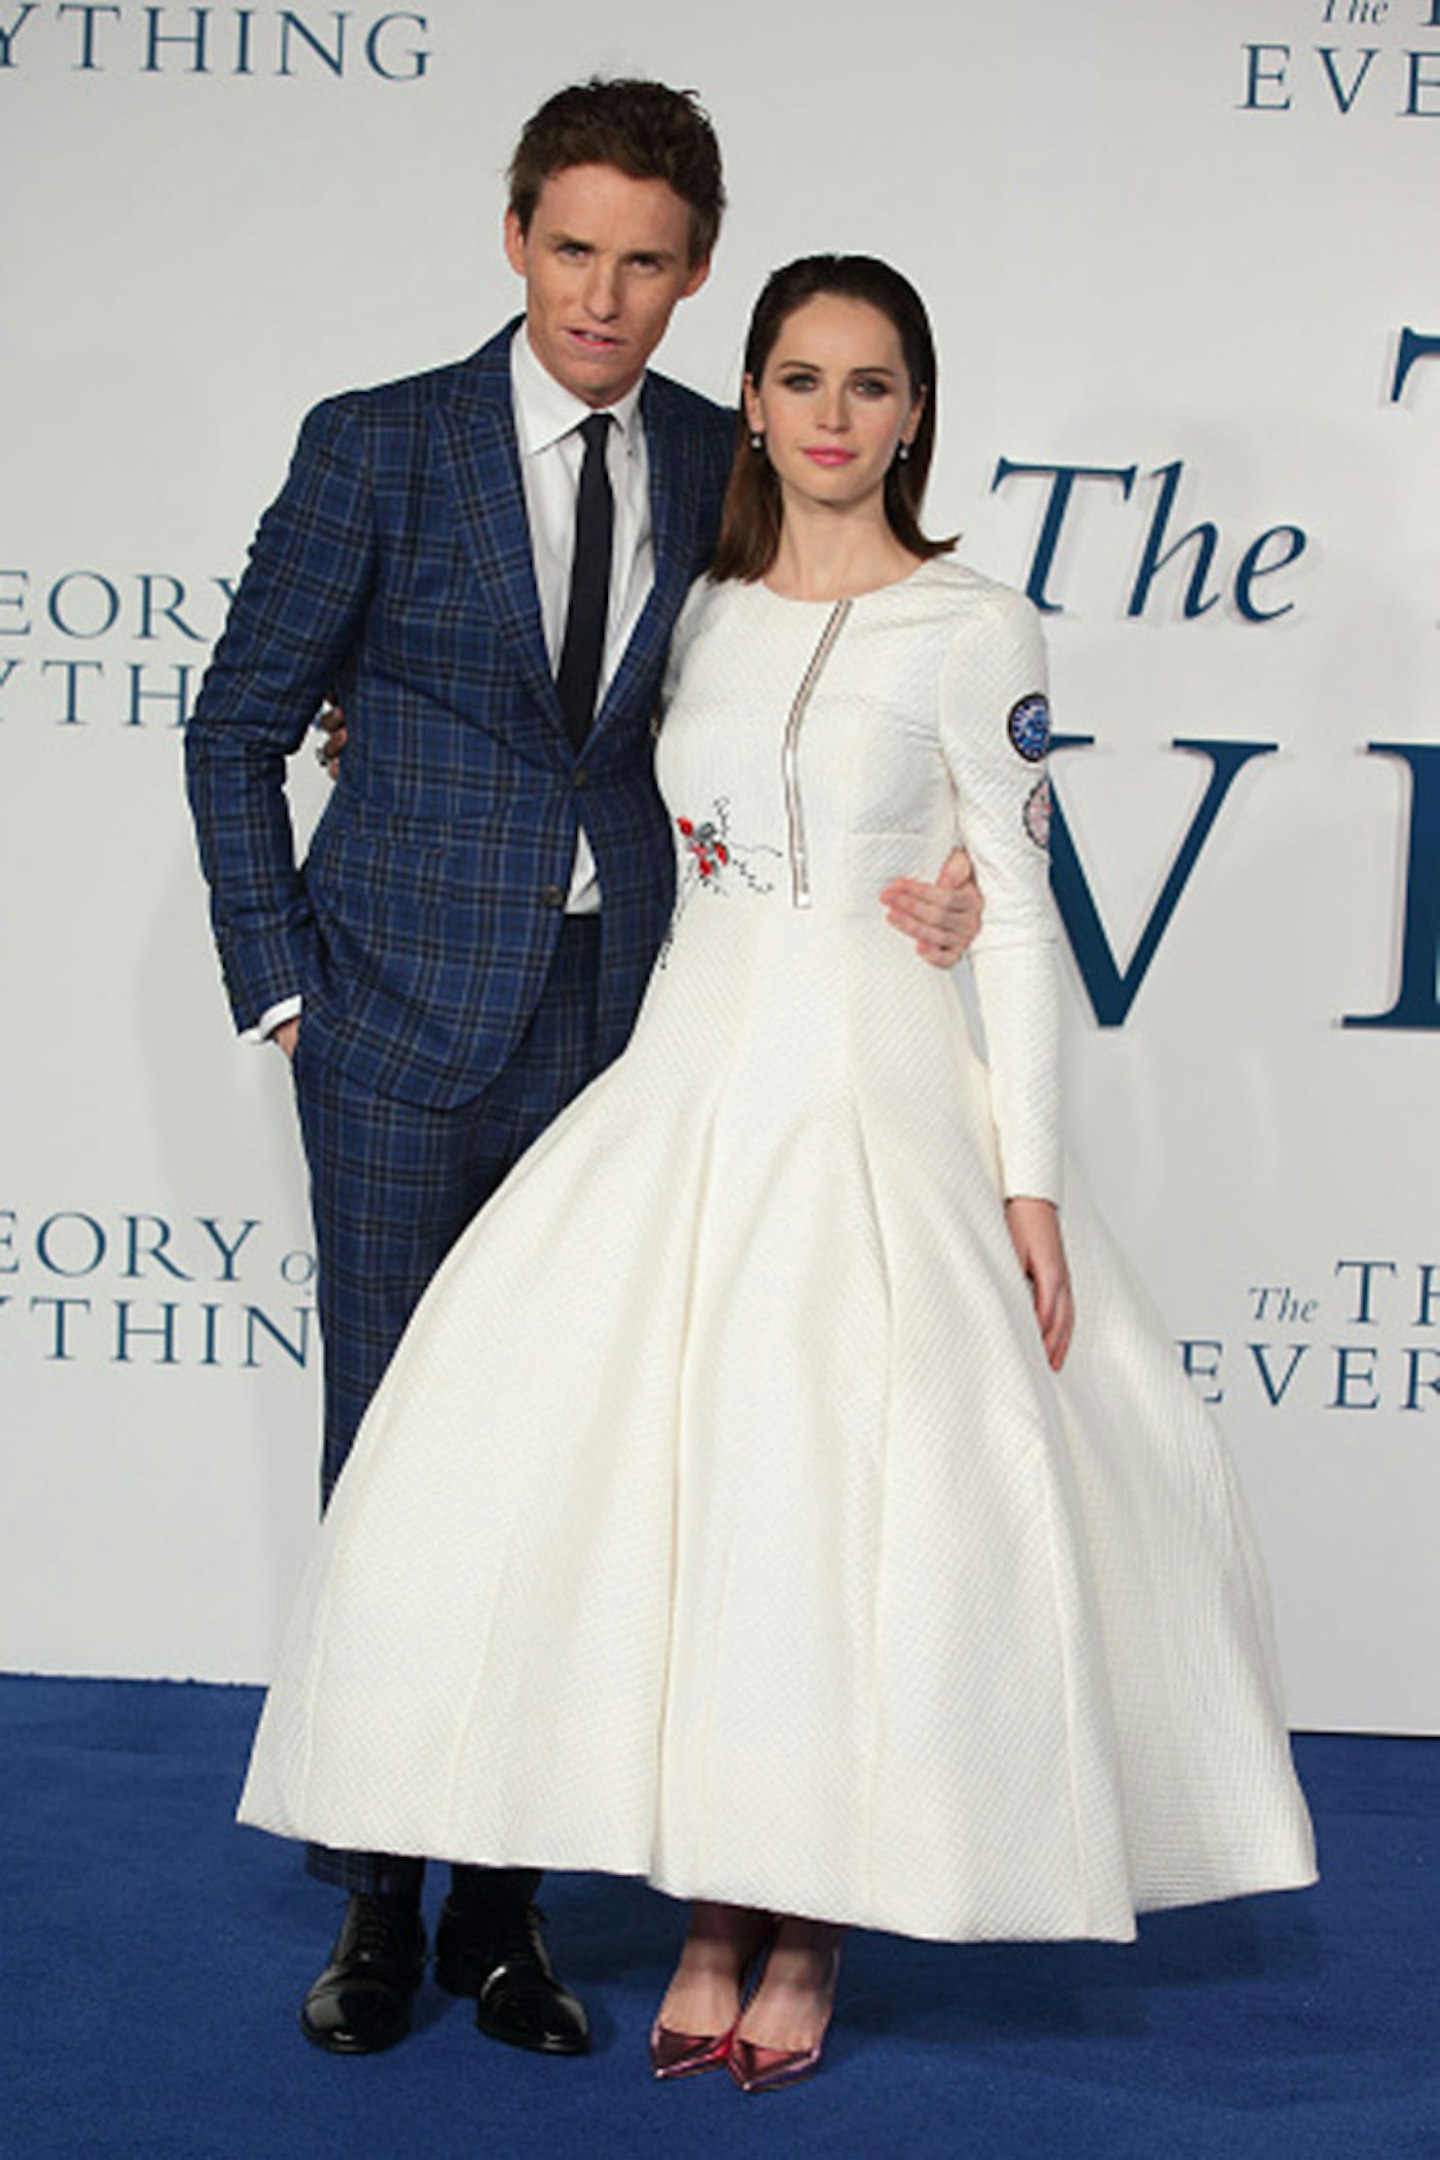 Eddie and Felicity at the UK premiere of The Theory Of Everything